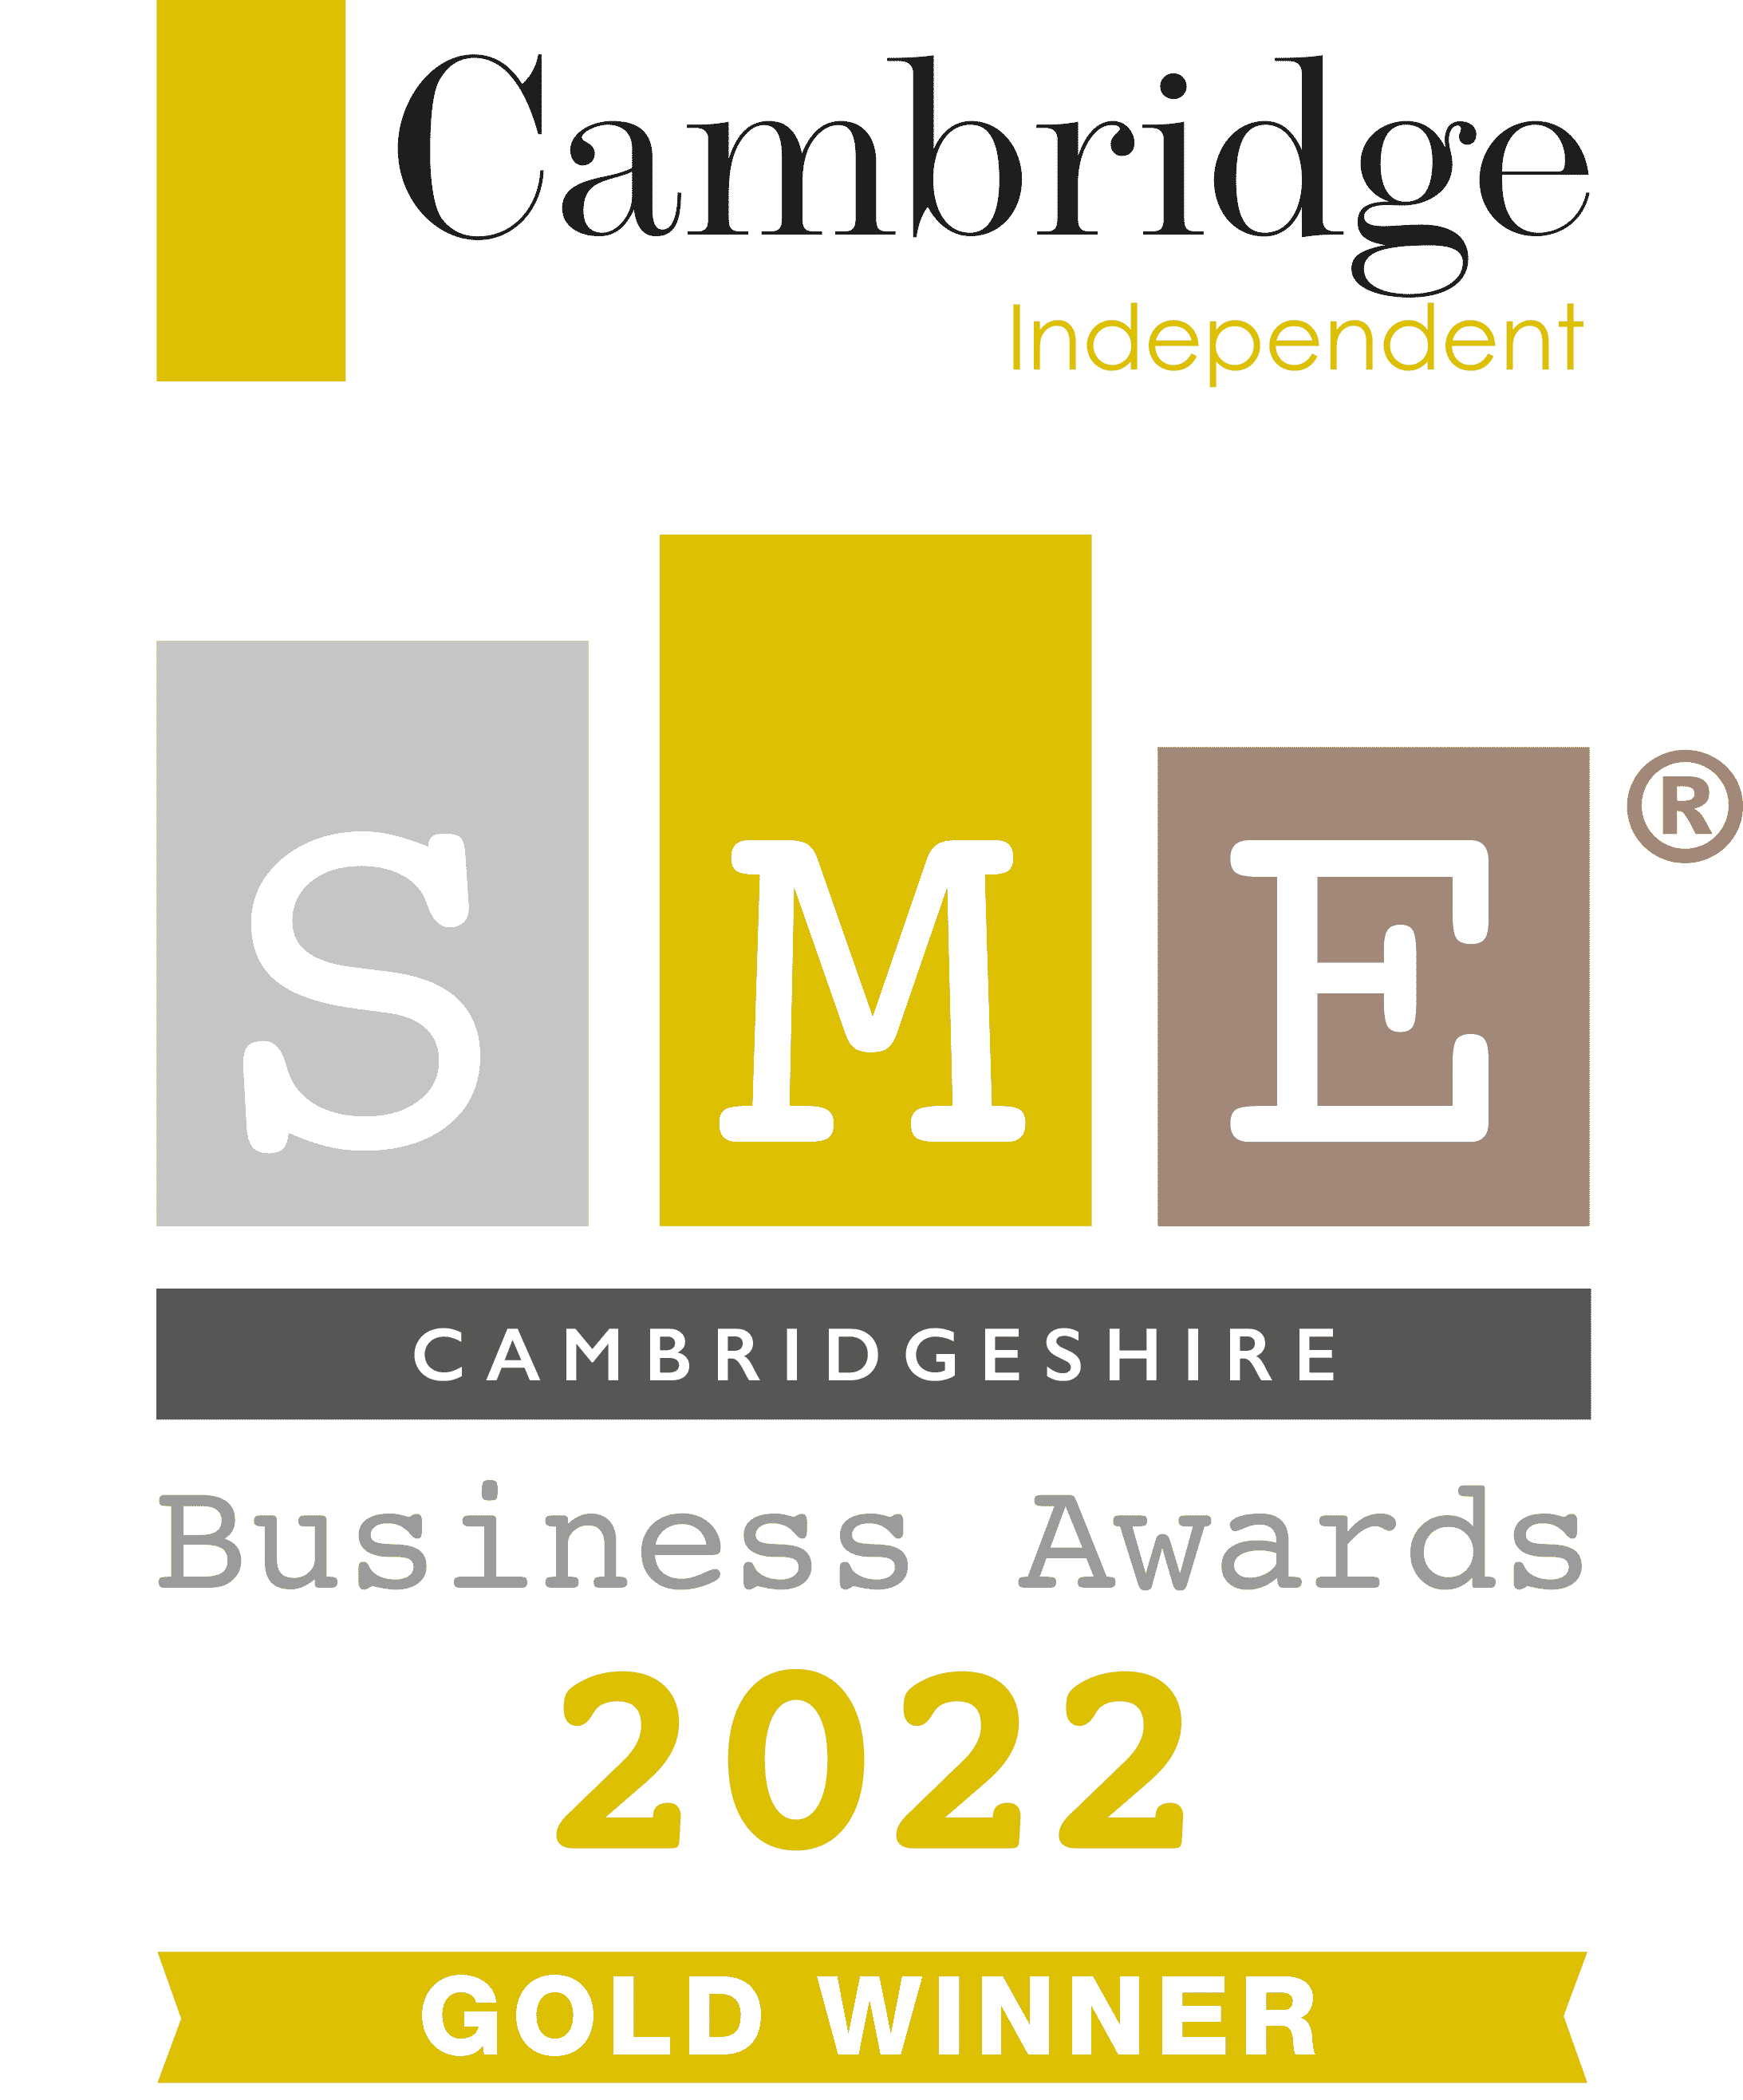 Cambs 2022 Ind - Gold Winner